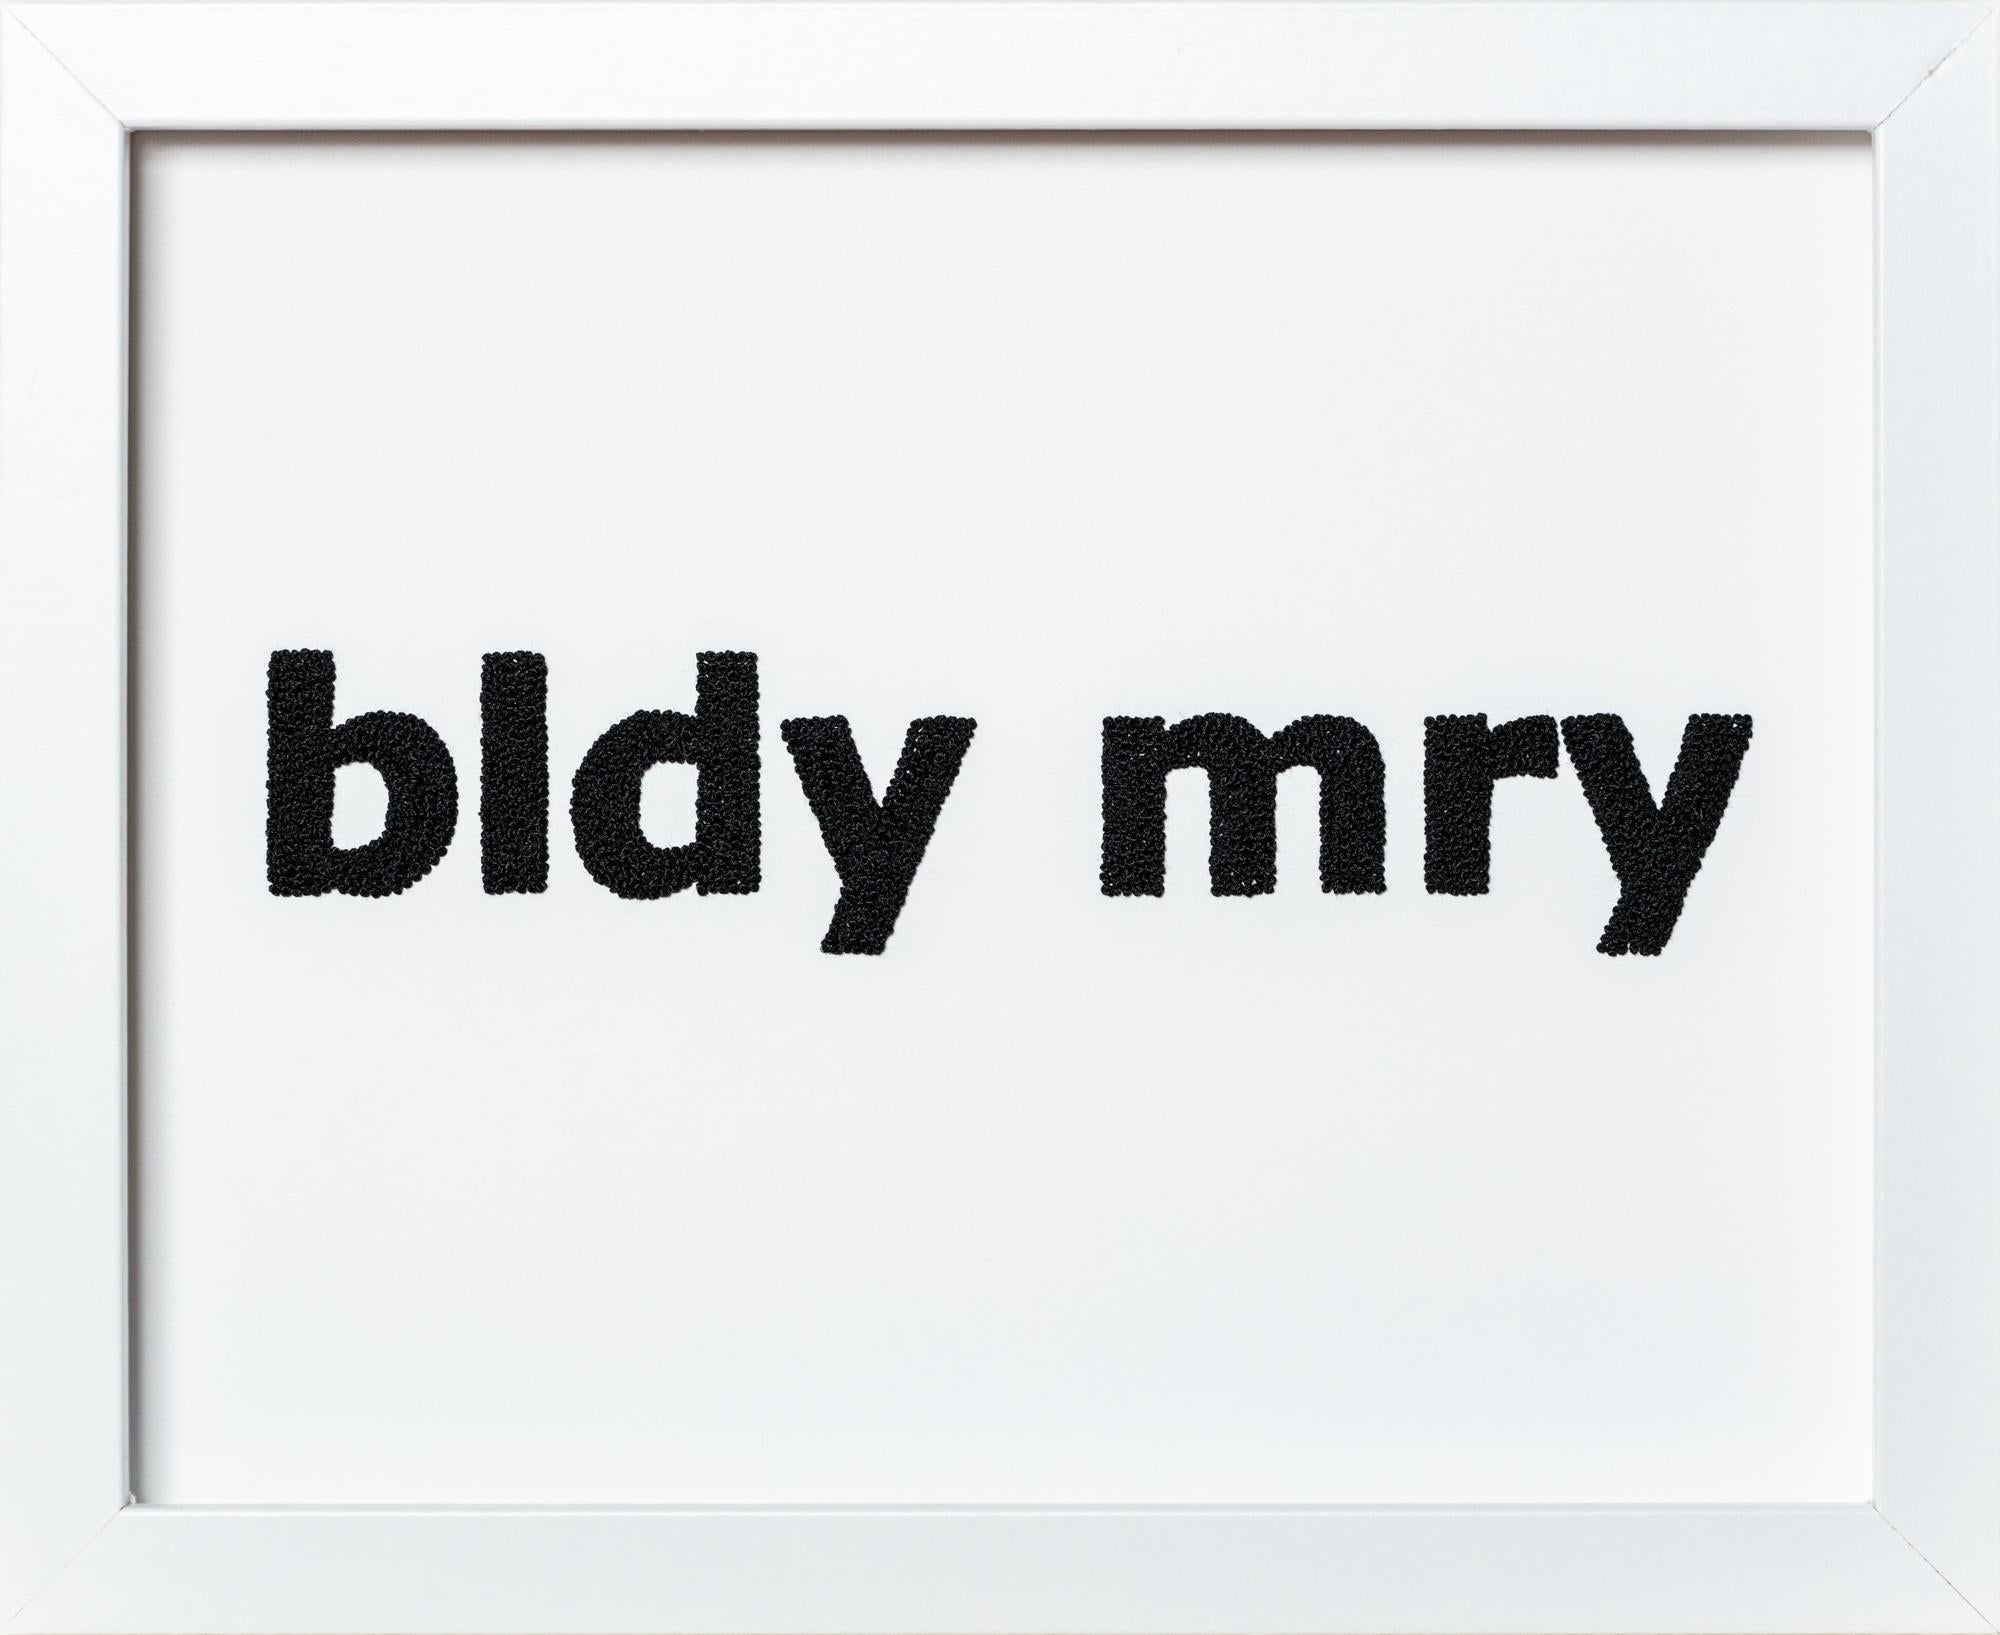 "Bloody Mary" hand-embroidery, bold lettering, text, black and white